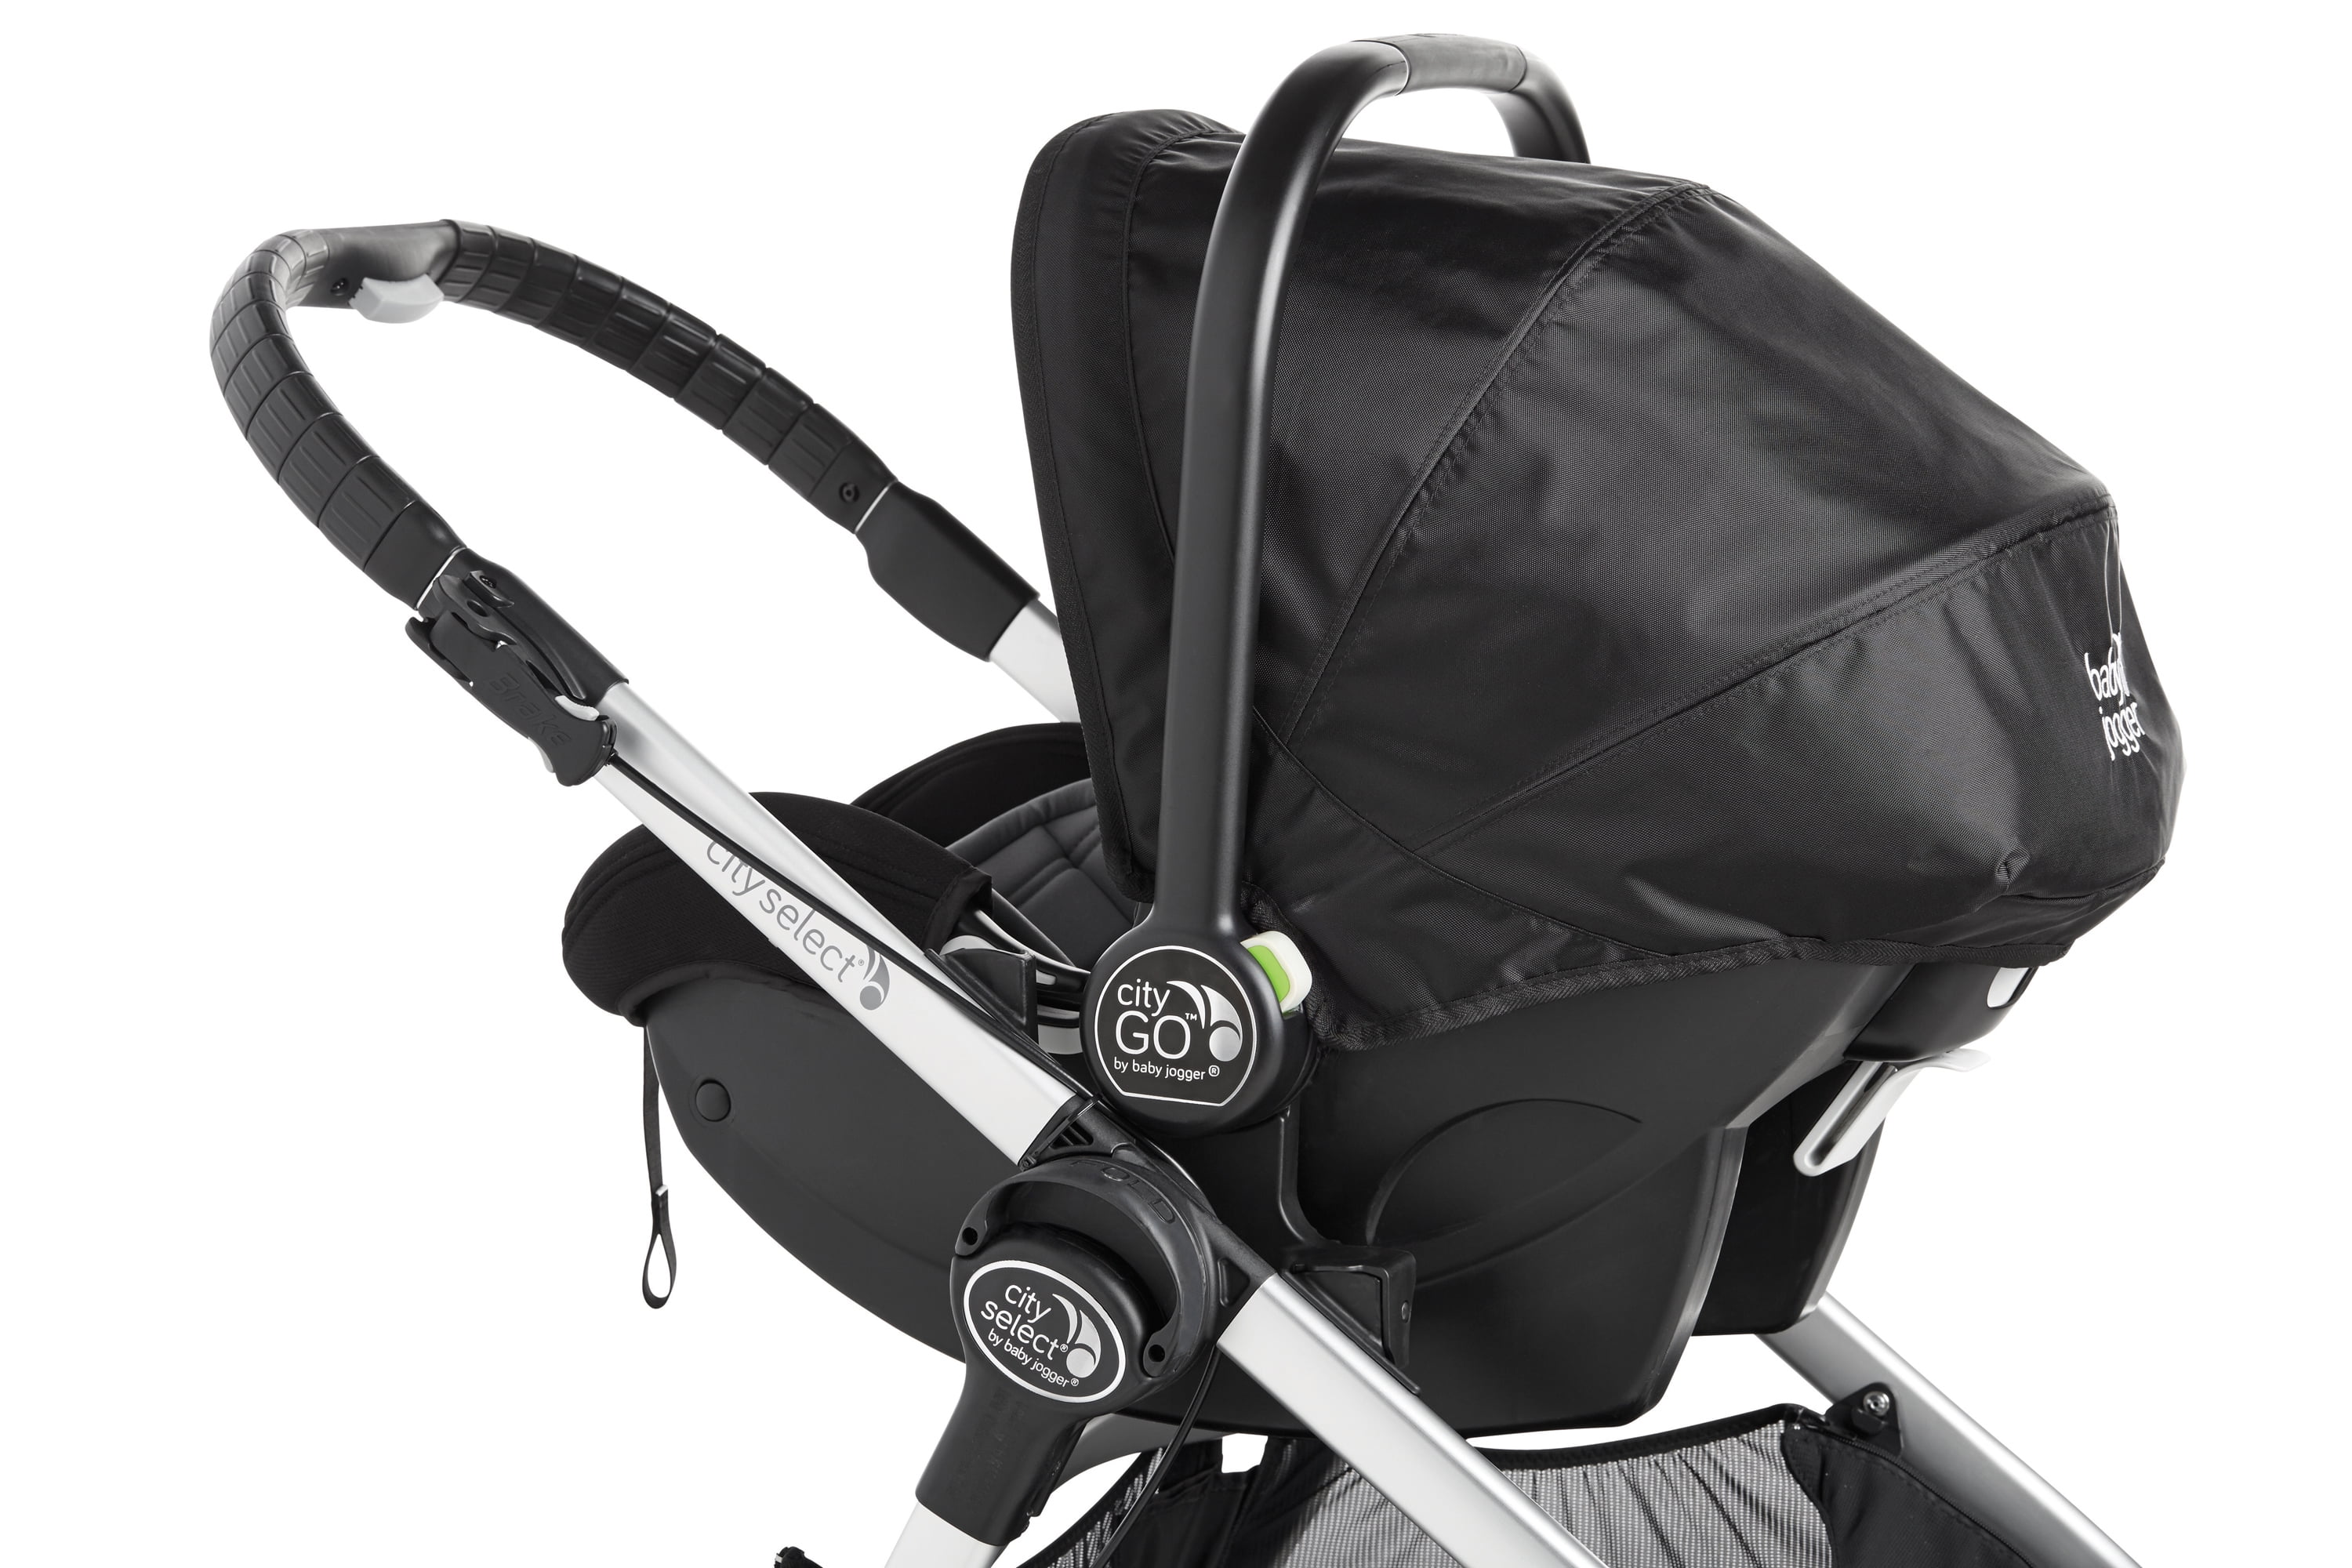 car seat attachment for city select double stroller